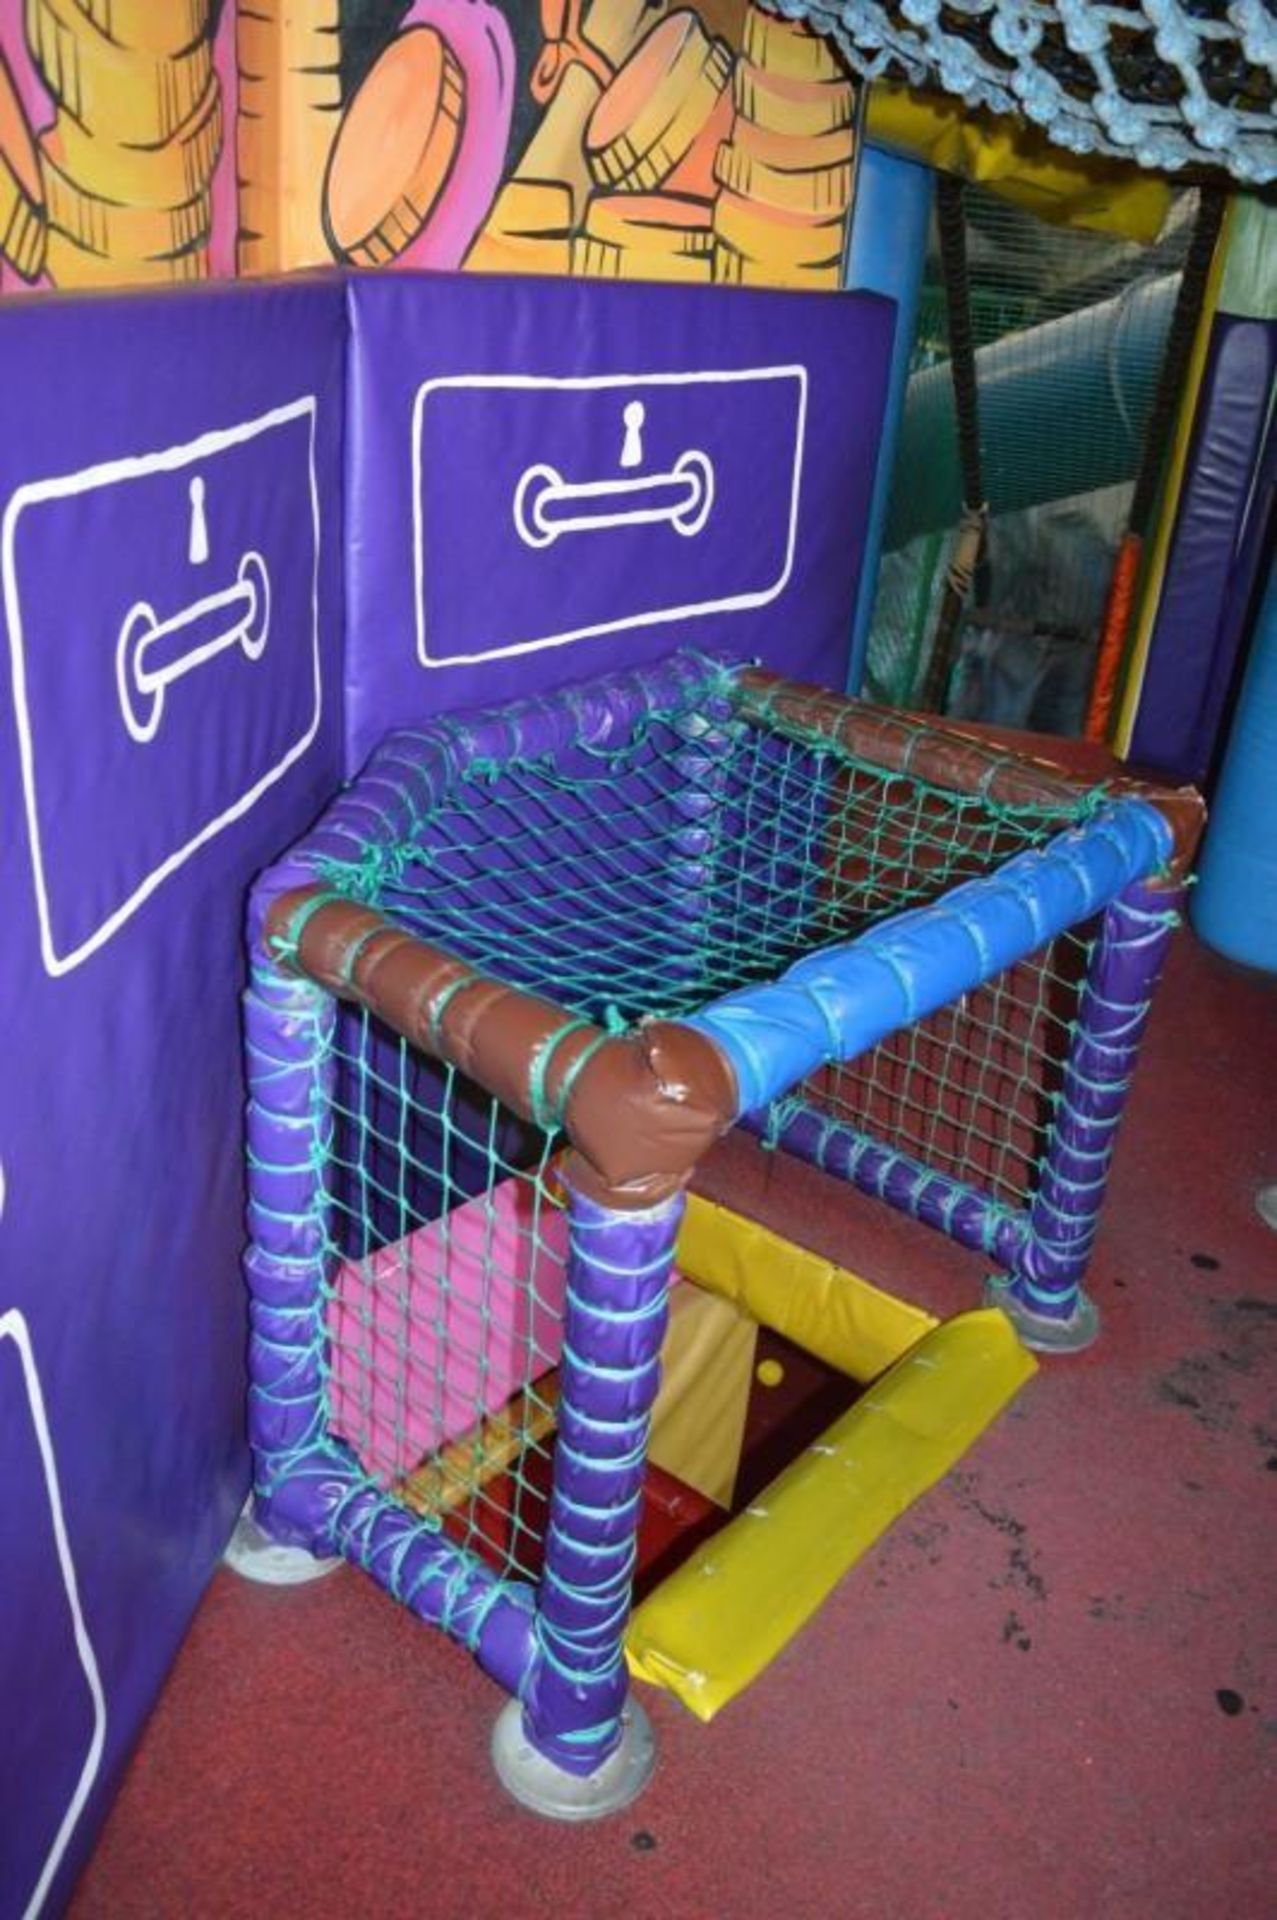 Puddletown Pirates Childrens Play Centre - Features Large Indoor Ball Pit, Huge Amount of Balls, Fun - Image 16 of 30